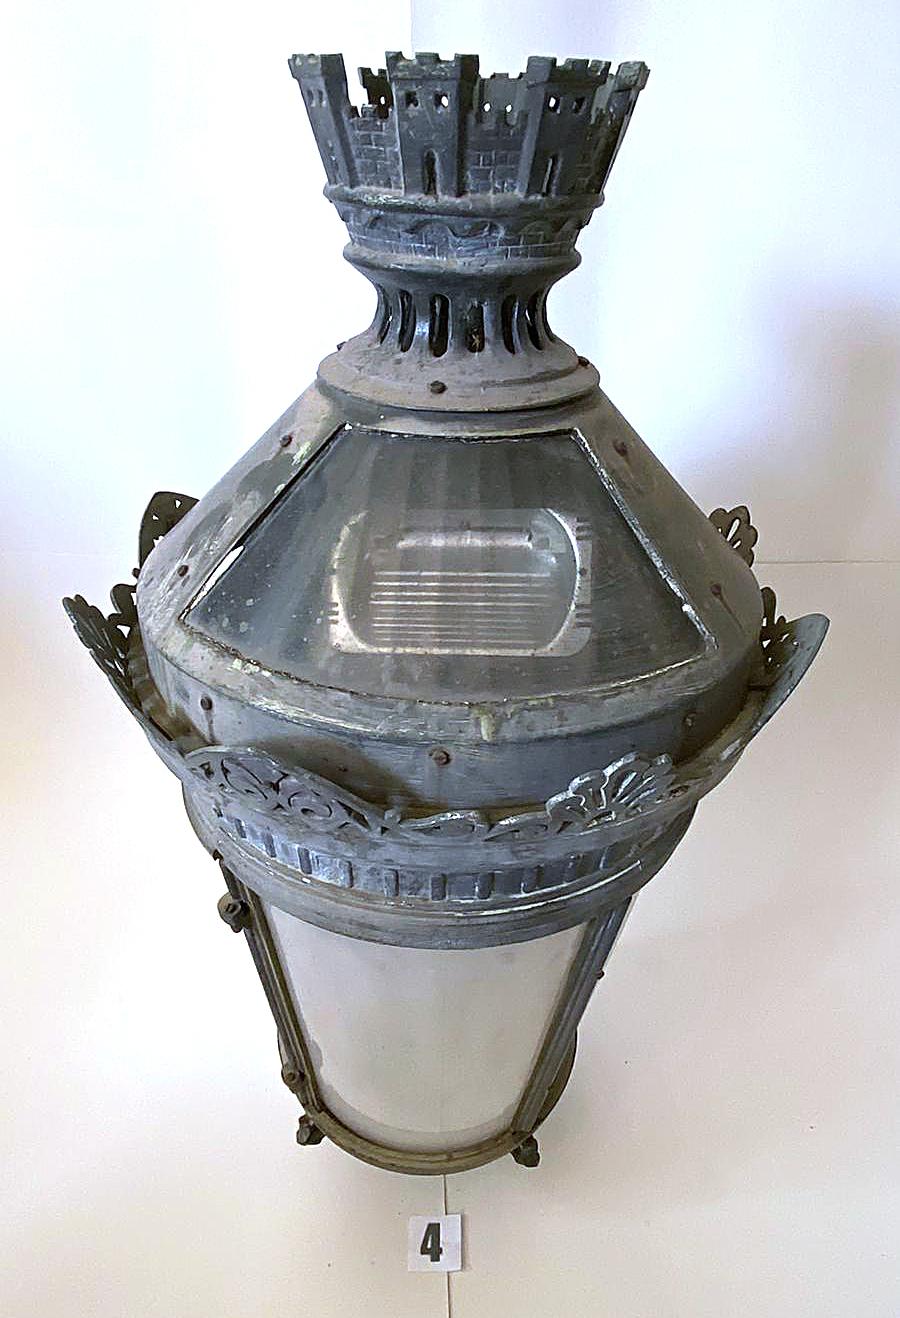 I'm offering a total of 29 Palatial Lanterns on my 1st Dibs store. 
 
****The Lantern pictured in this listing is LANTERN #4, and my restorer chose it as a single lantern that can be purchased by itself or combined with your choice of other